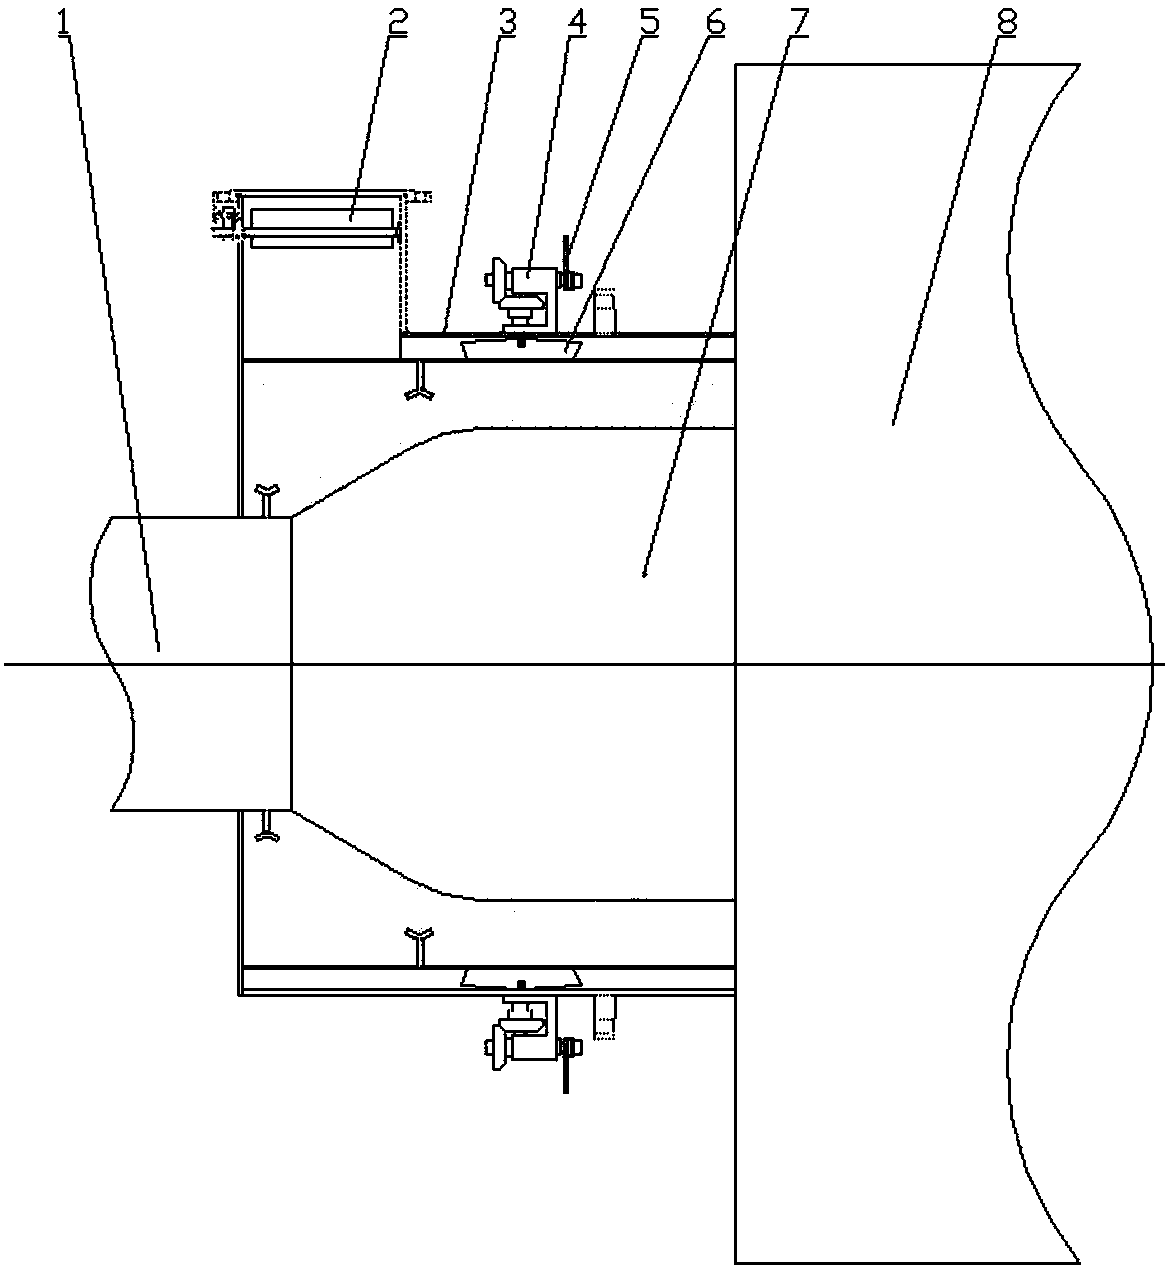 Device for preventing burner nozzle from bonding slag, with axial adjustable blades